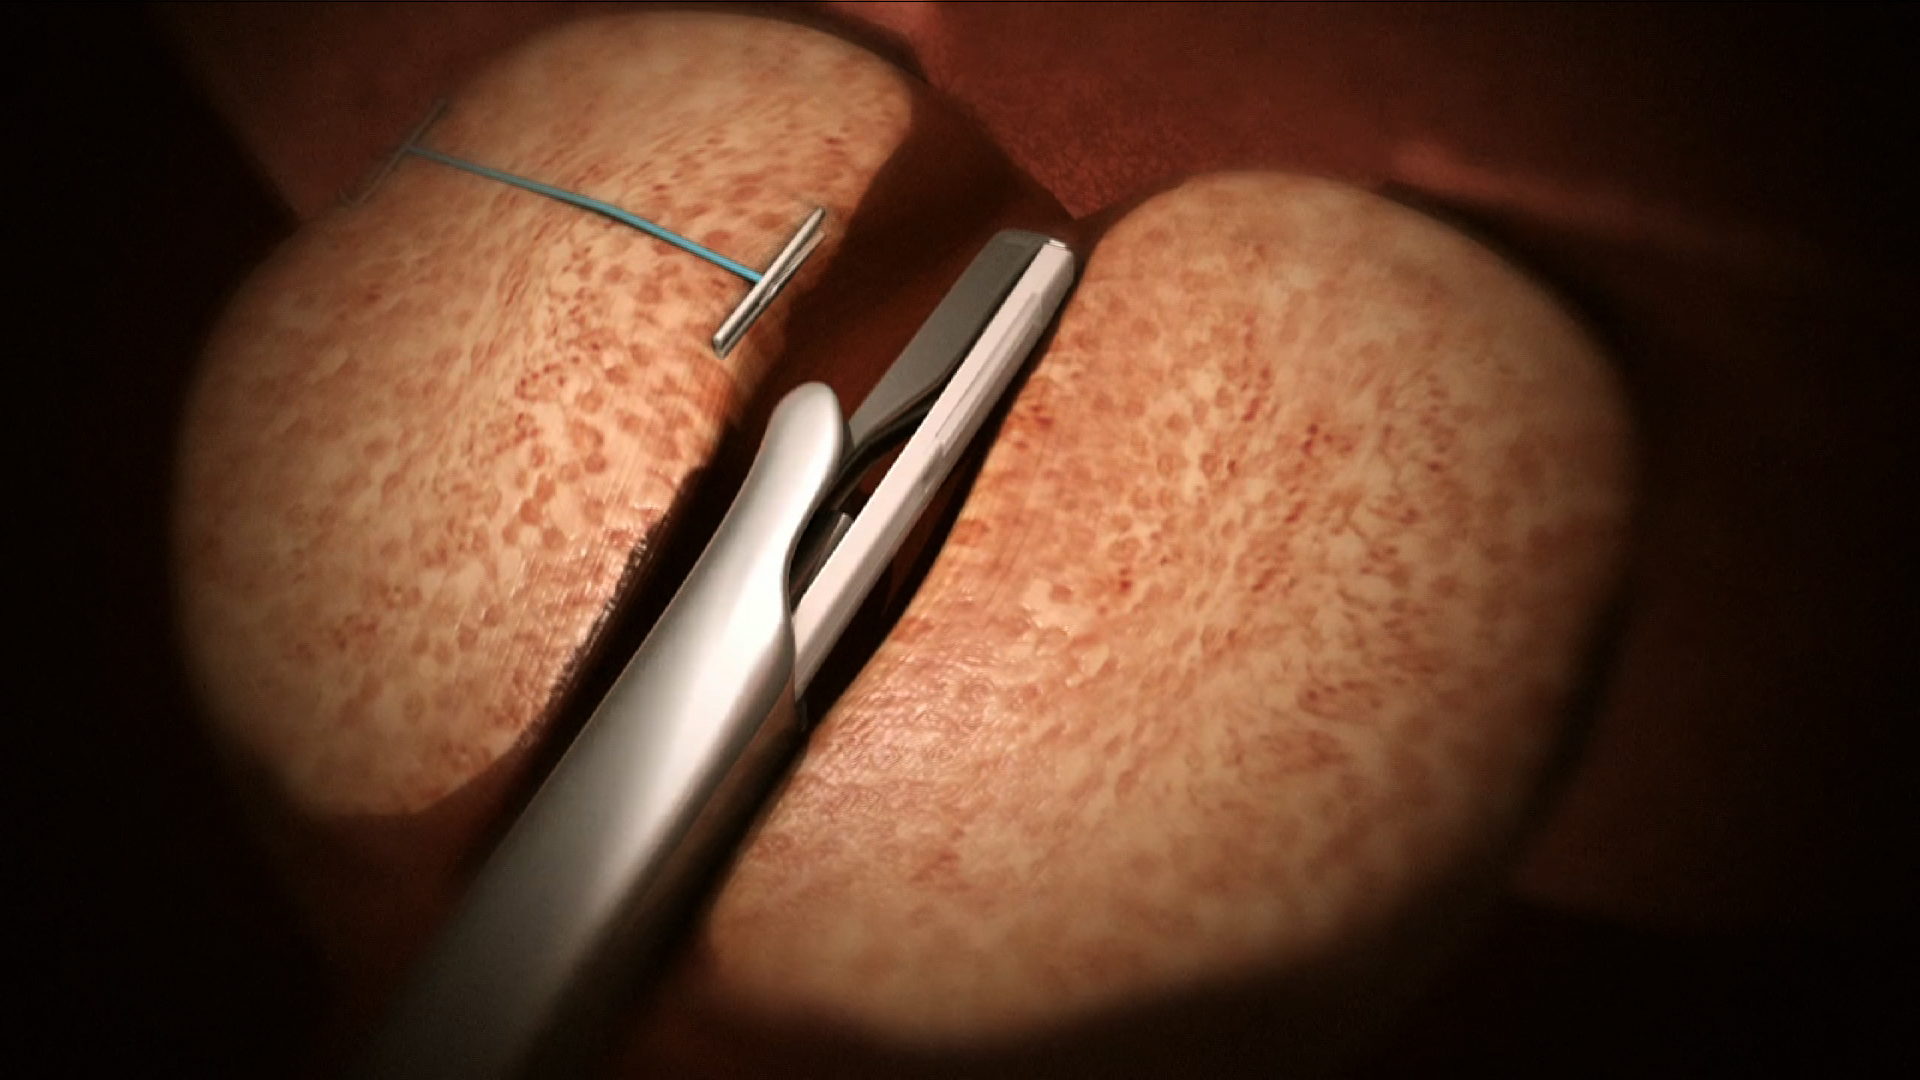 Minimally Invasive Urolift Procedure A New Option For Men With